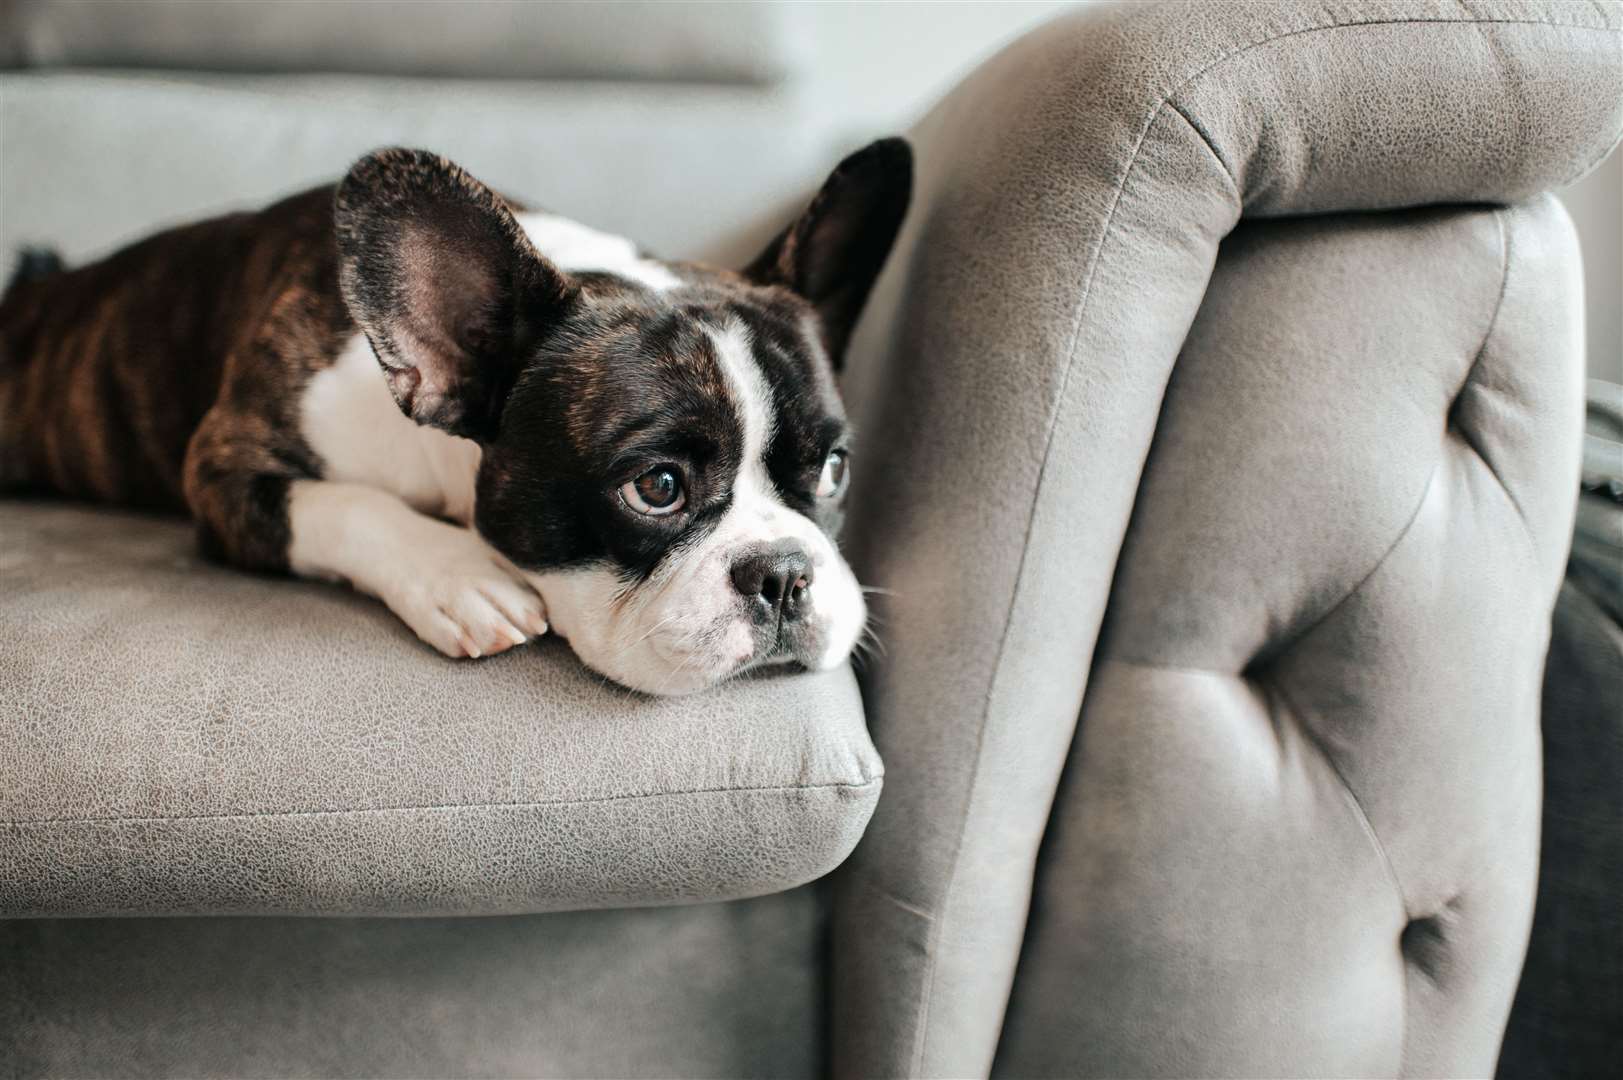 There were a high number of French Bulldogs stolen last year